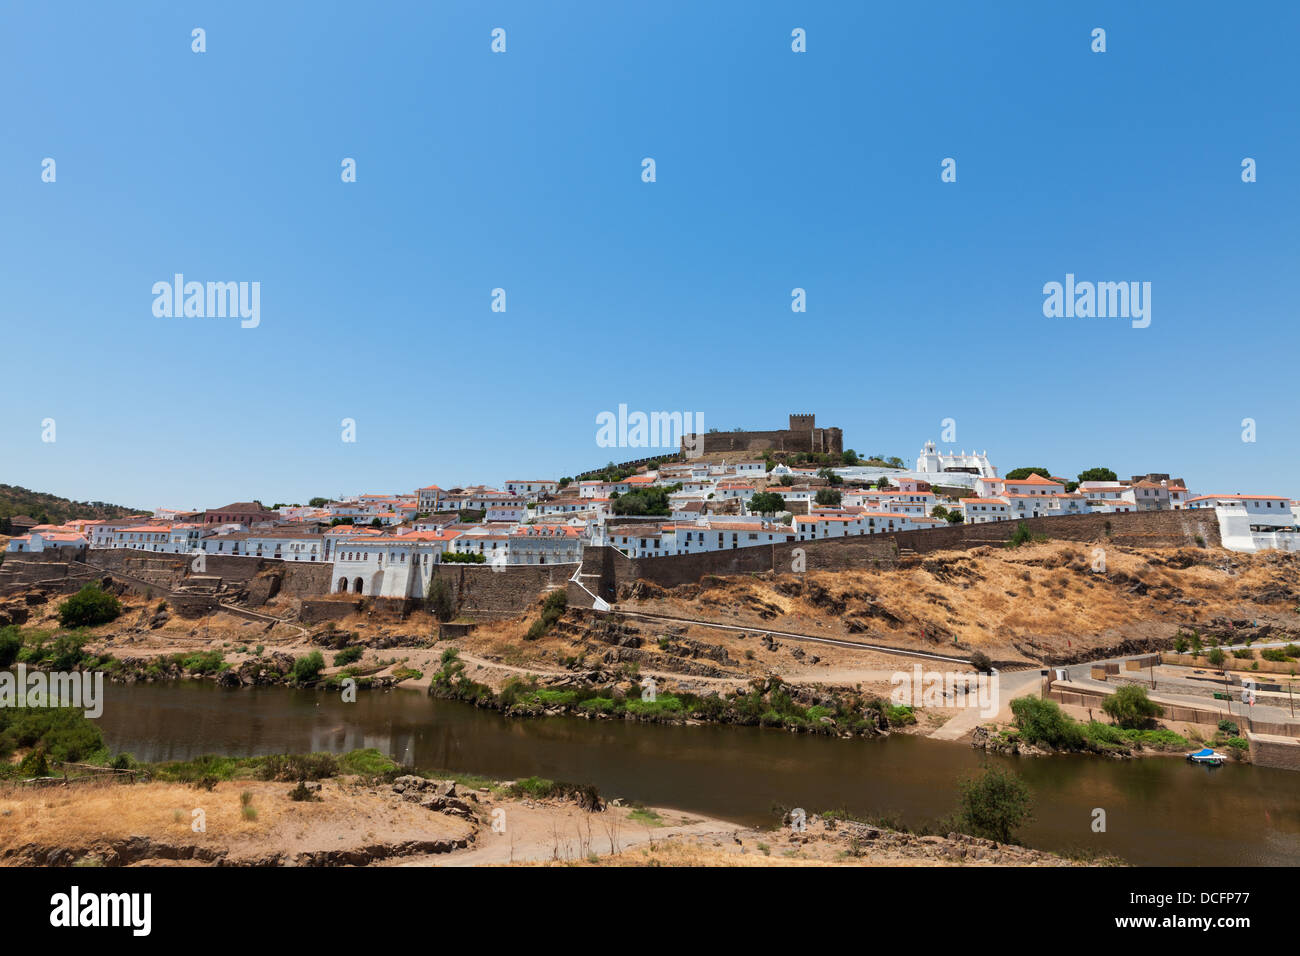 Walled fortified town on a hilltop protected by the ancient stone castle on the hill above which overlooks the town below Stock Photo